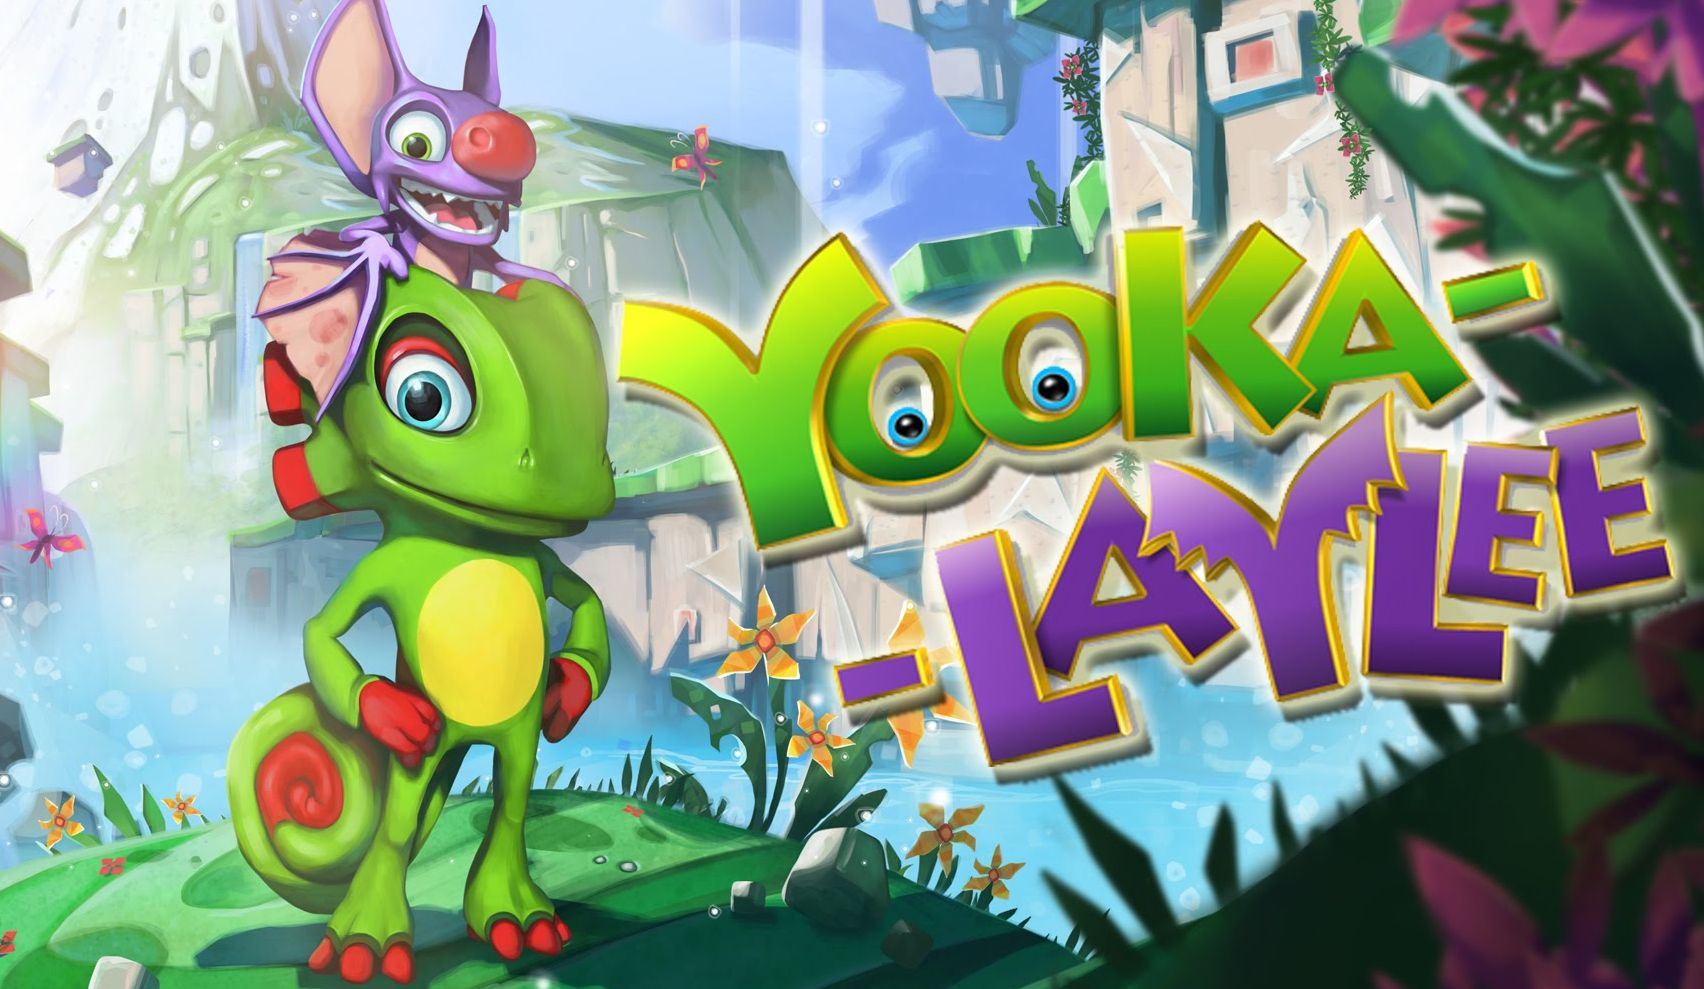 Review game Yooka-Laylee: entertainment for everyone